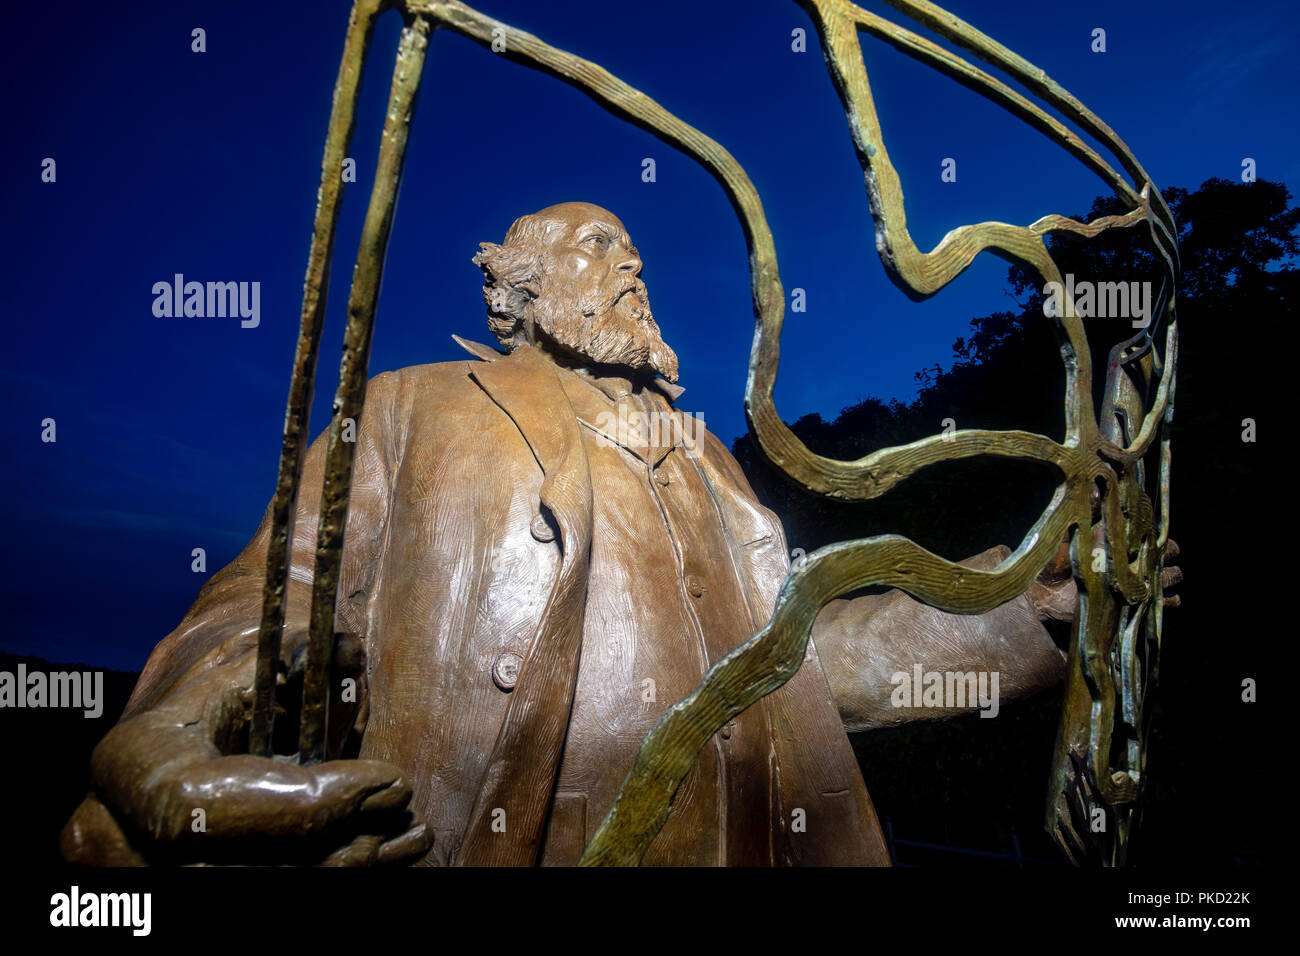 Frederick Law Olmsted - Father of American landscape architecture - Bronze Statue by artist Zenos Frudakis - North Carolina Arboretum, Asheville, Nort Stock Photo